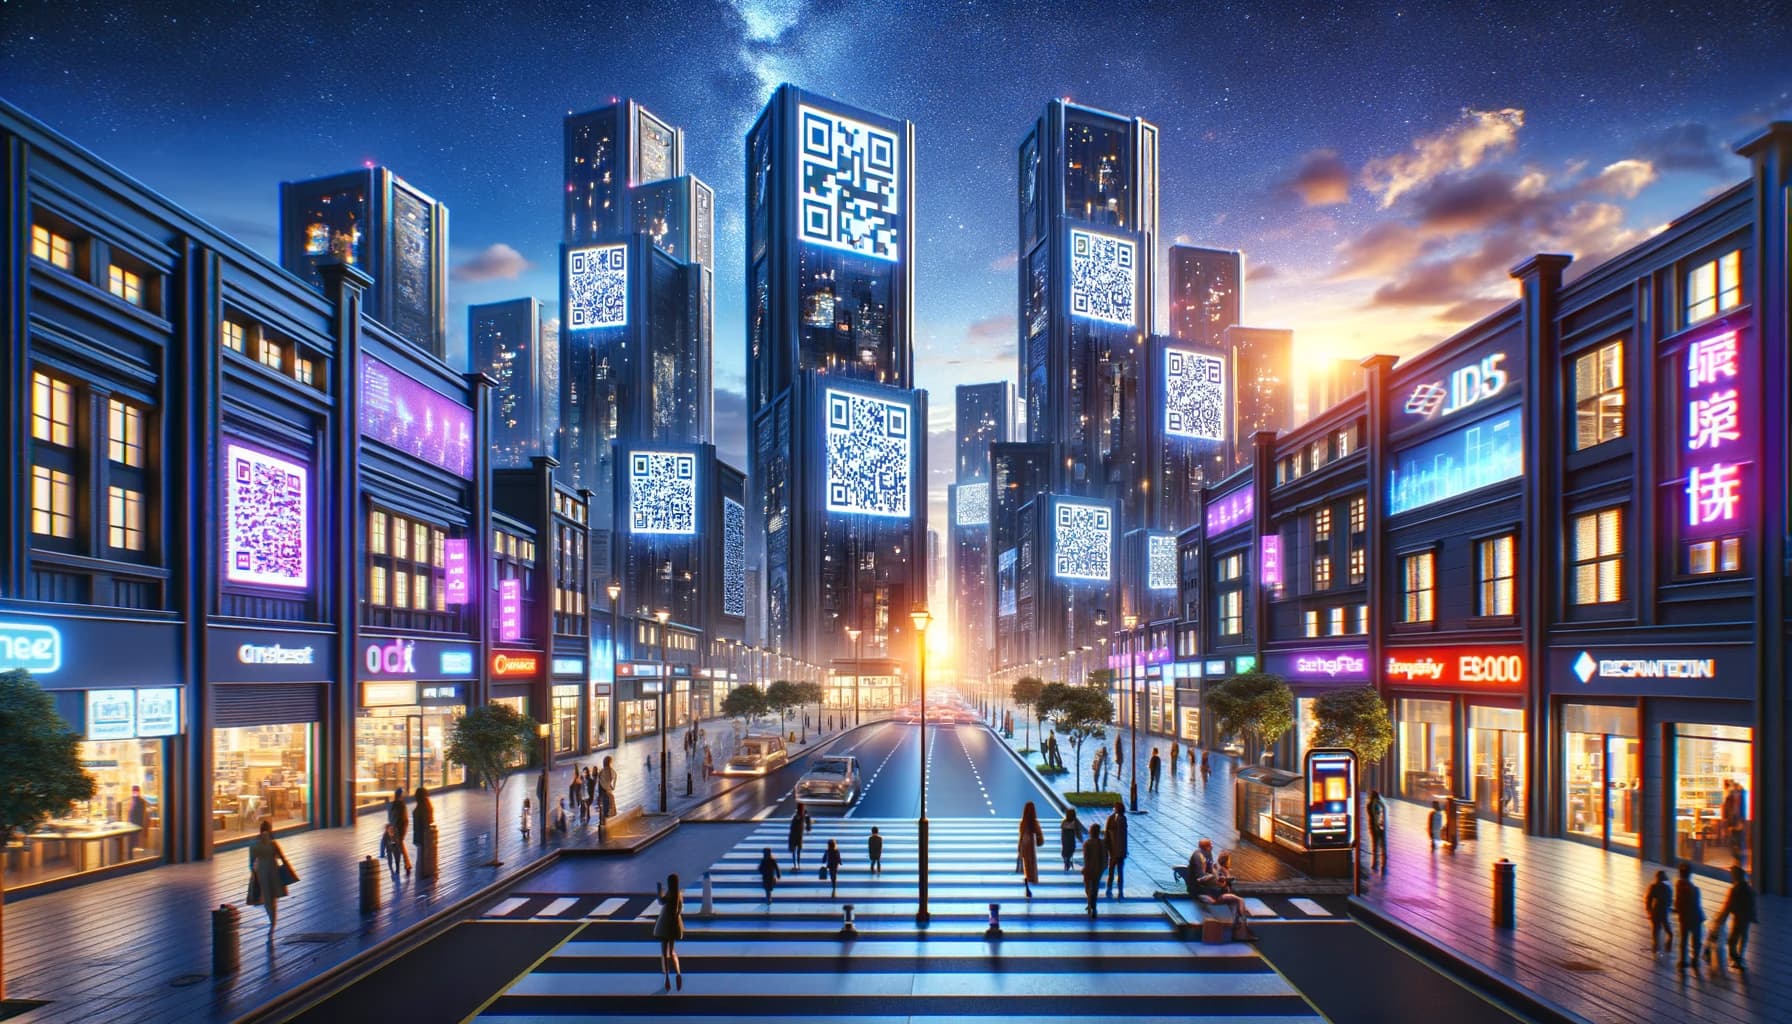 A dazzling futuristic city street at night, illuminated by buildings and billboards adorned with glowing QR codes under a starry sky, depicting a high-tech urban landscape.